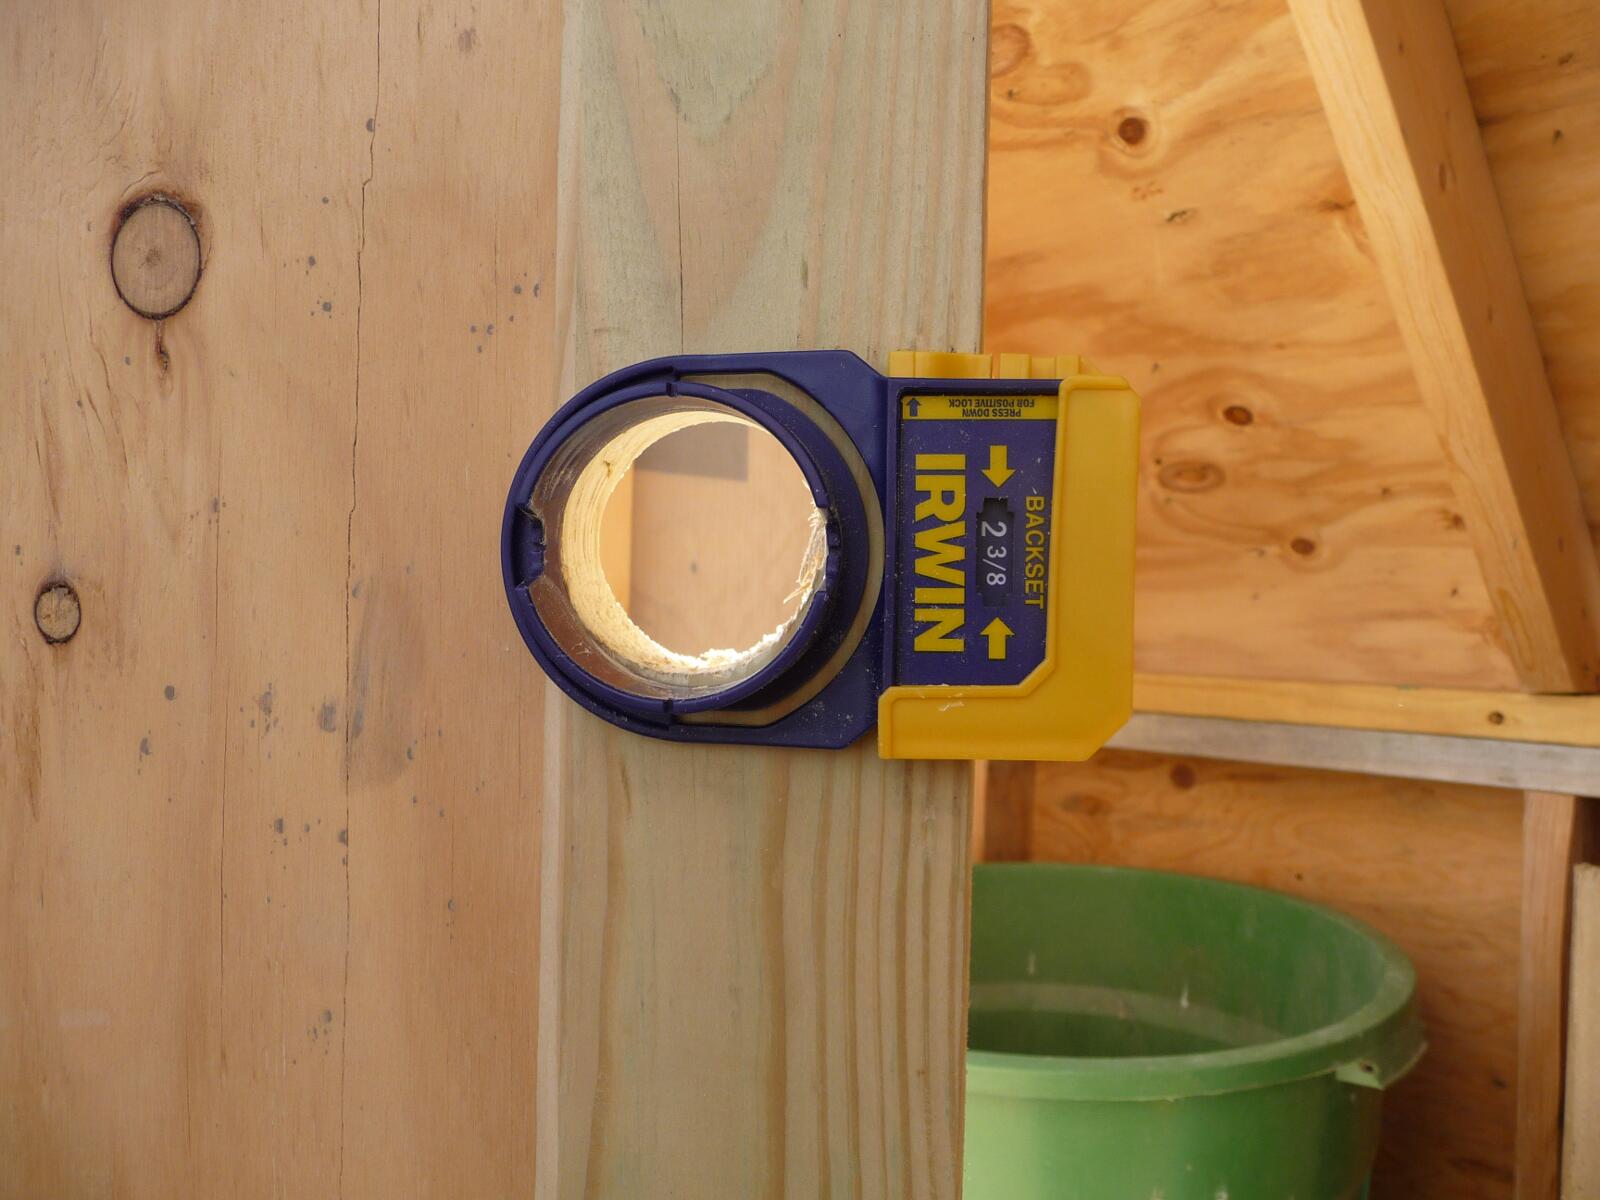 Tool for aligning the holes in the door.